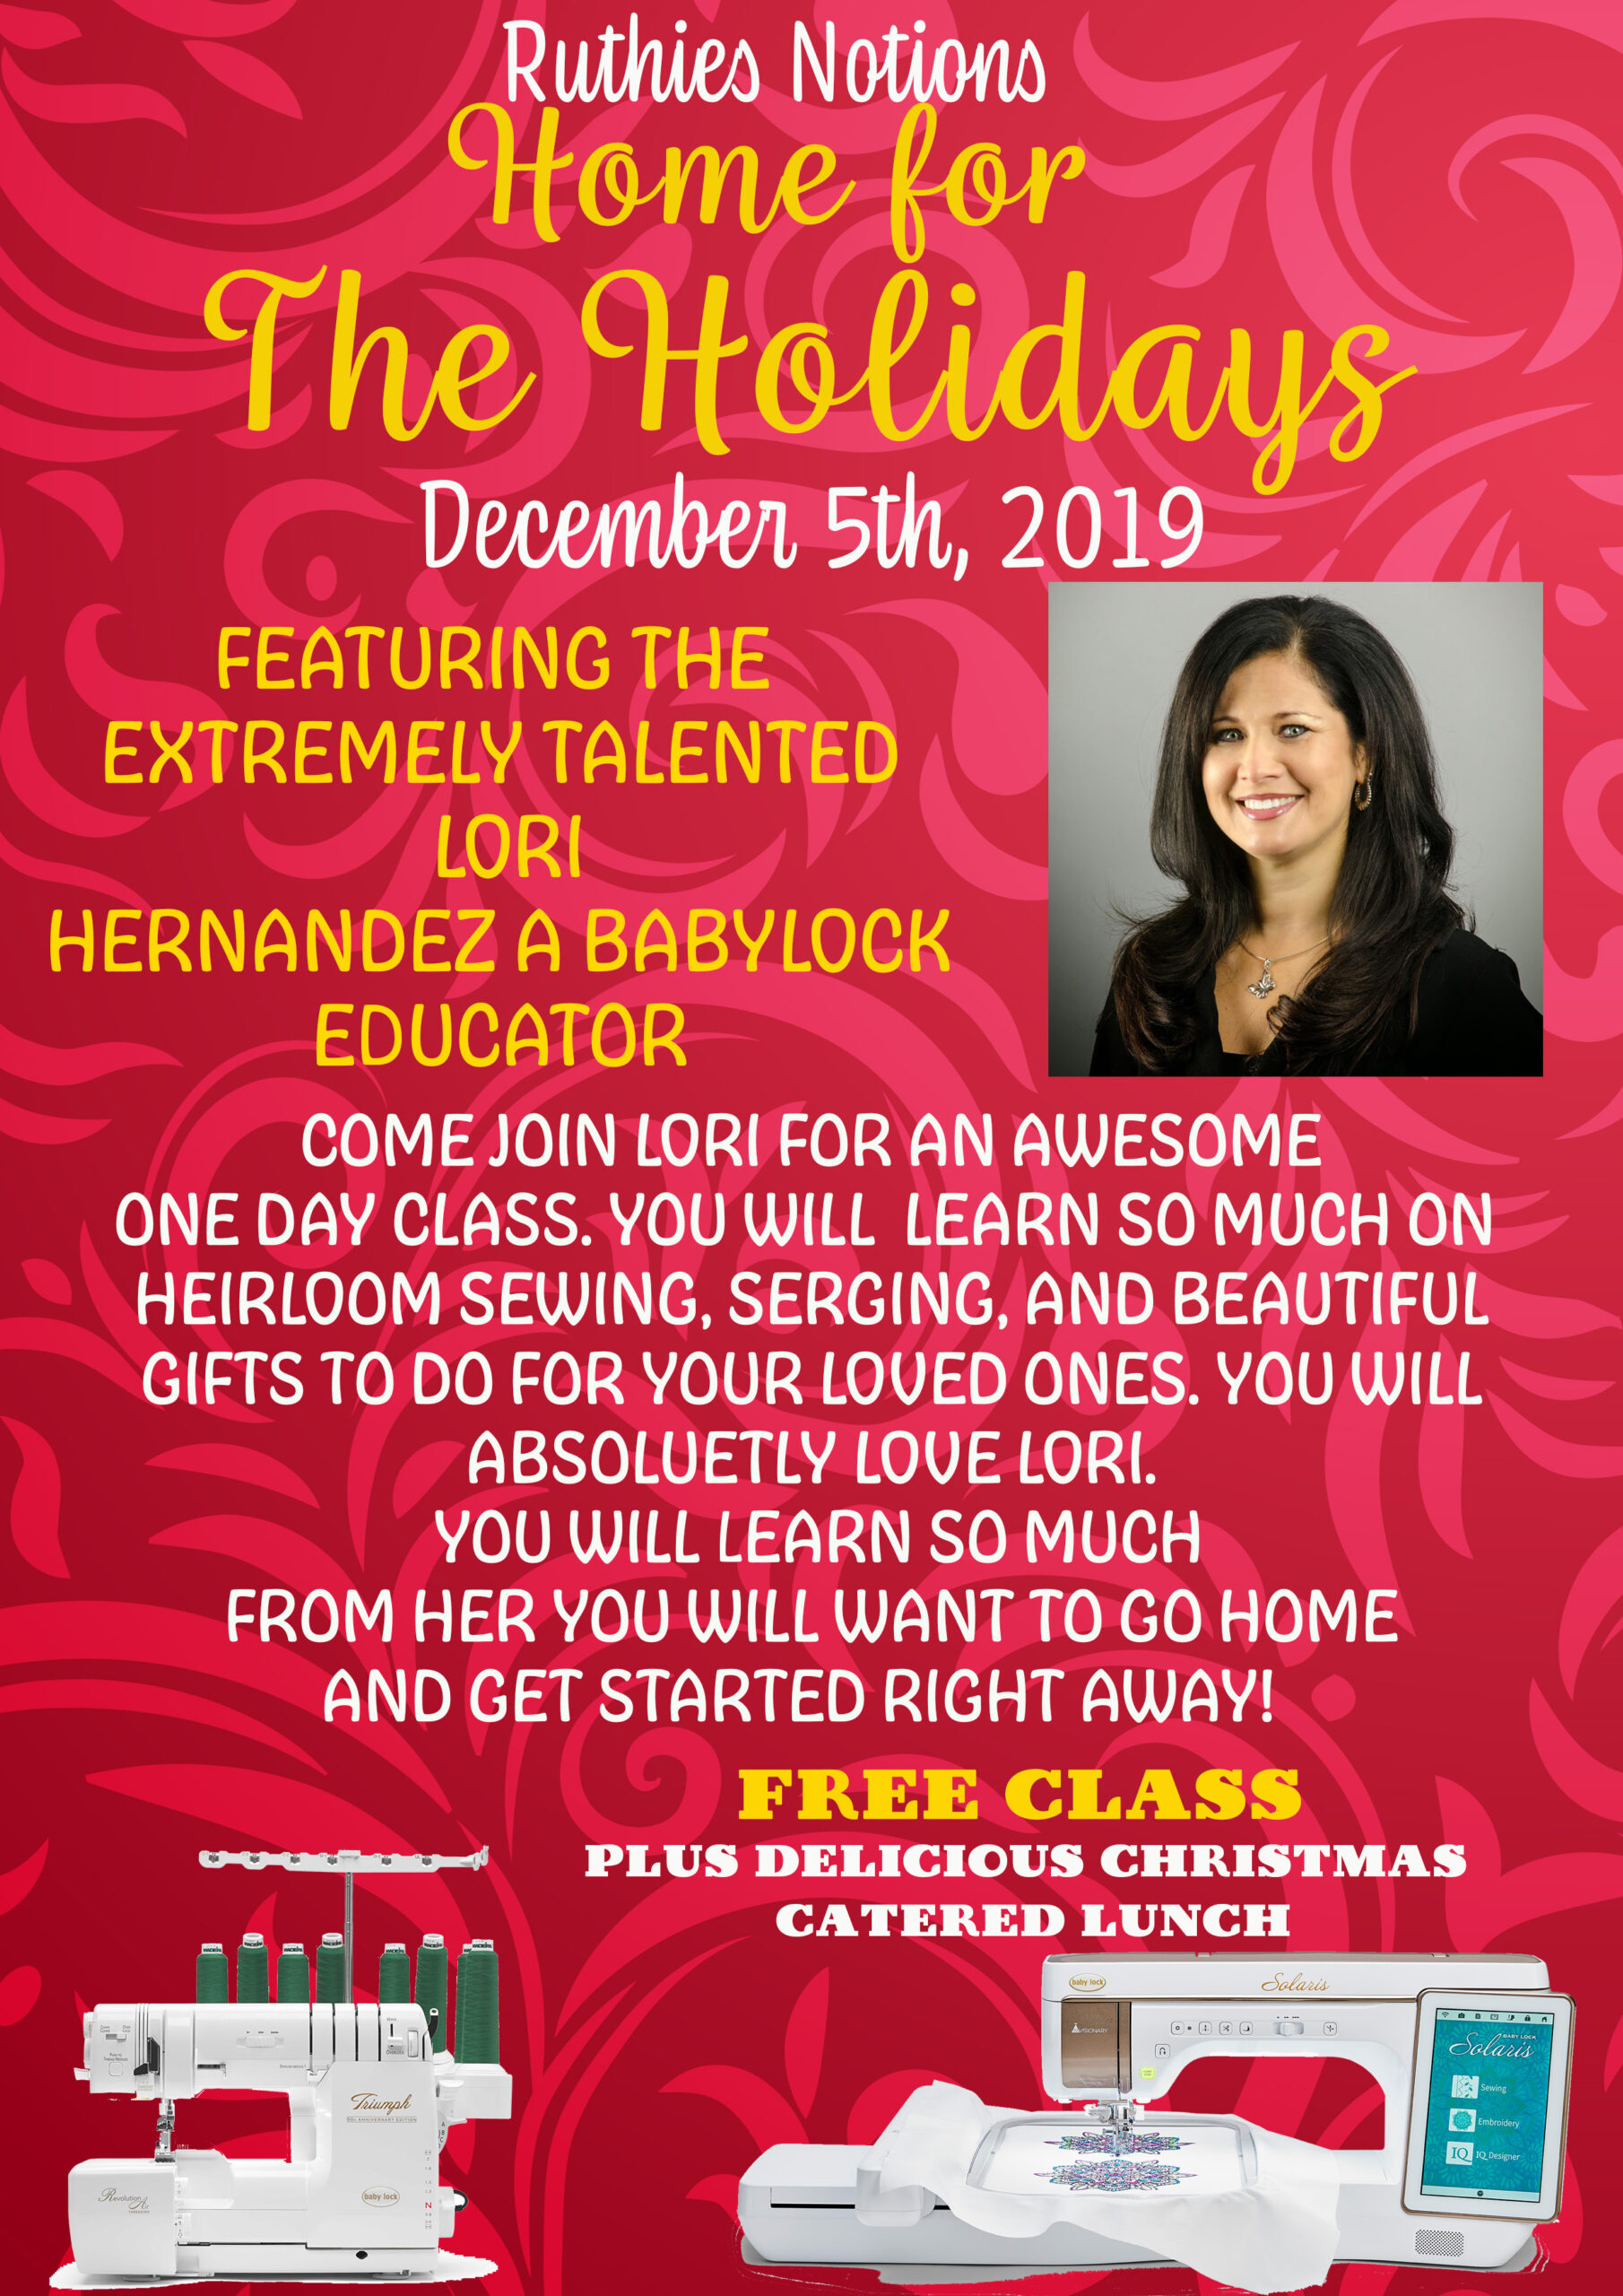 Home for the holidays lori hernandez